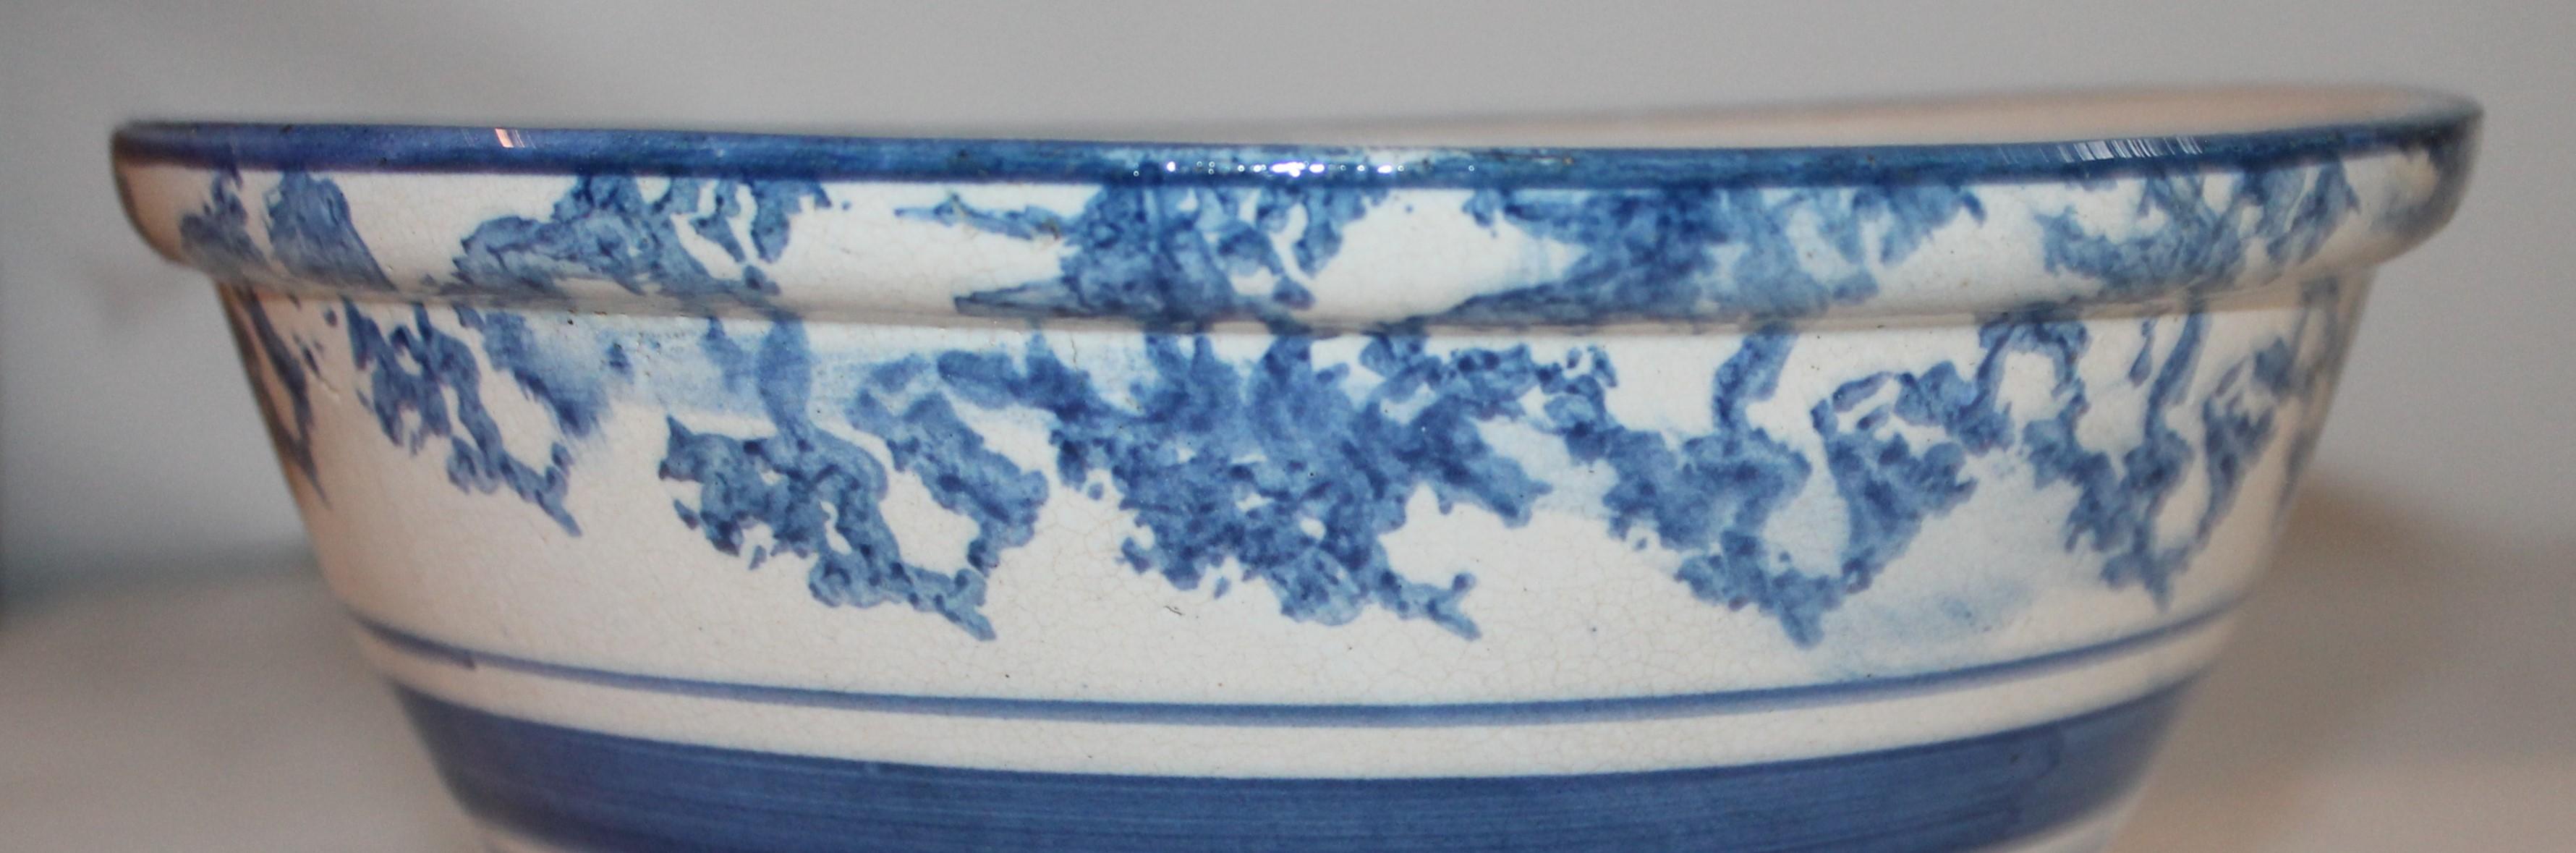 American Sponge Ware Pottery Bowl, 19th Century For Sale